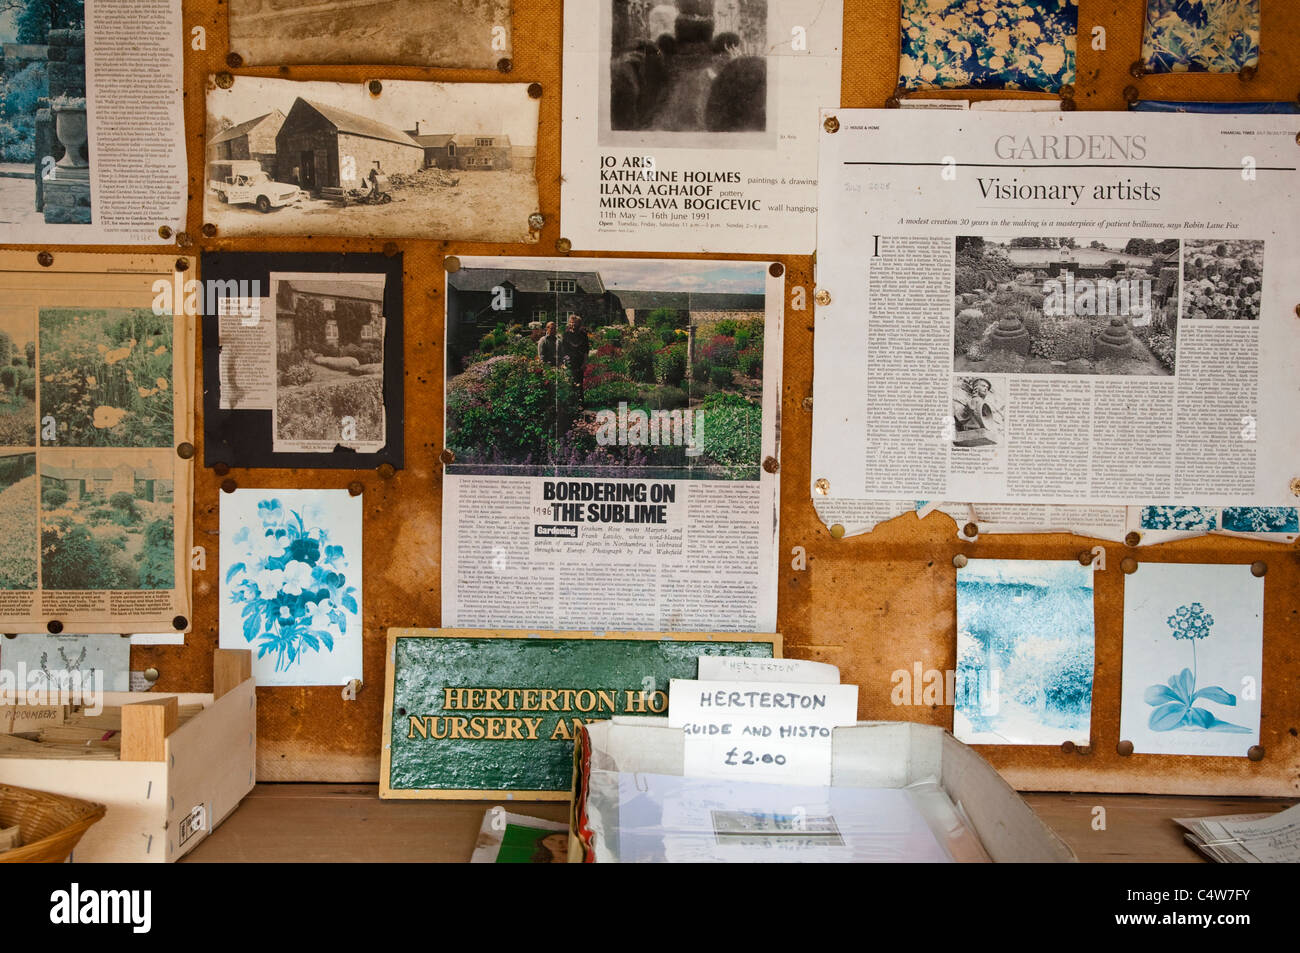 A faded collection of reviews / articles about Herterton House garden - on display in the plant shop.  Northumberland, UK. Stock Photo